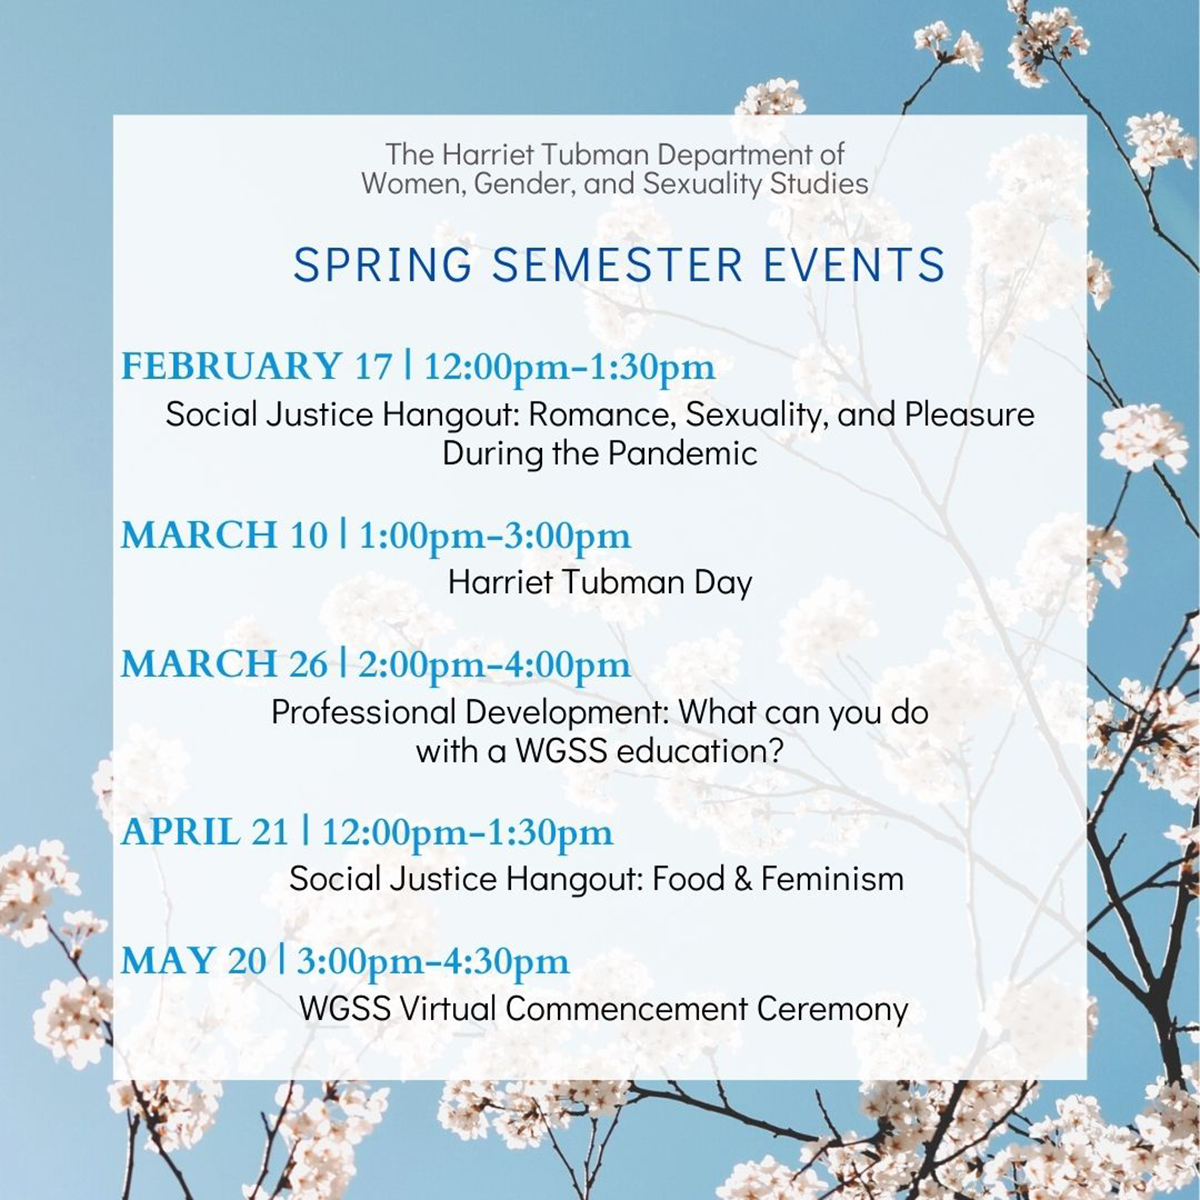 List of event dates on a blue background with cherry blossoms all information is accessible at the events page